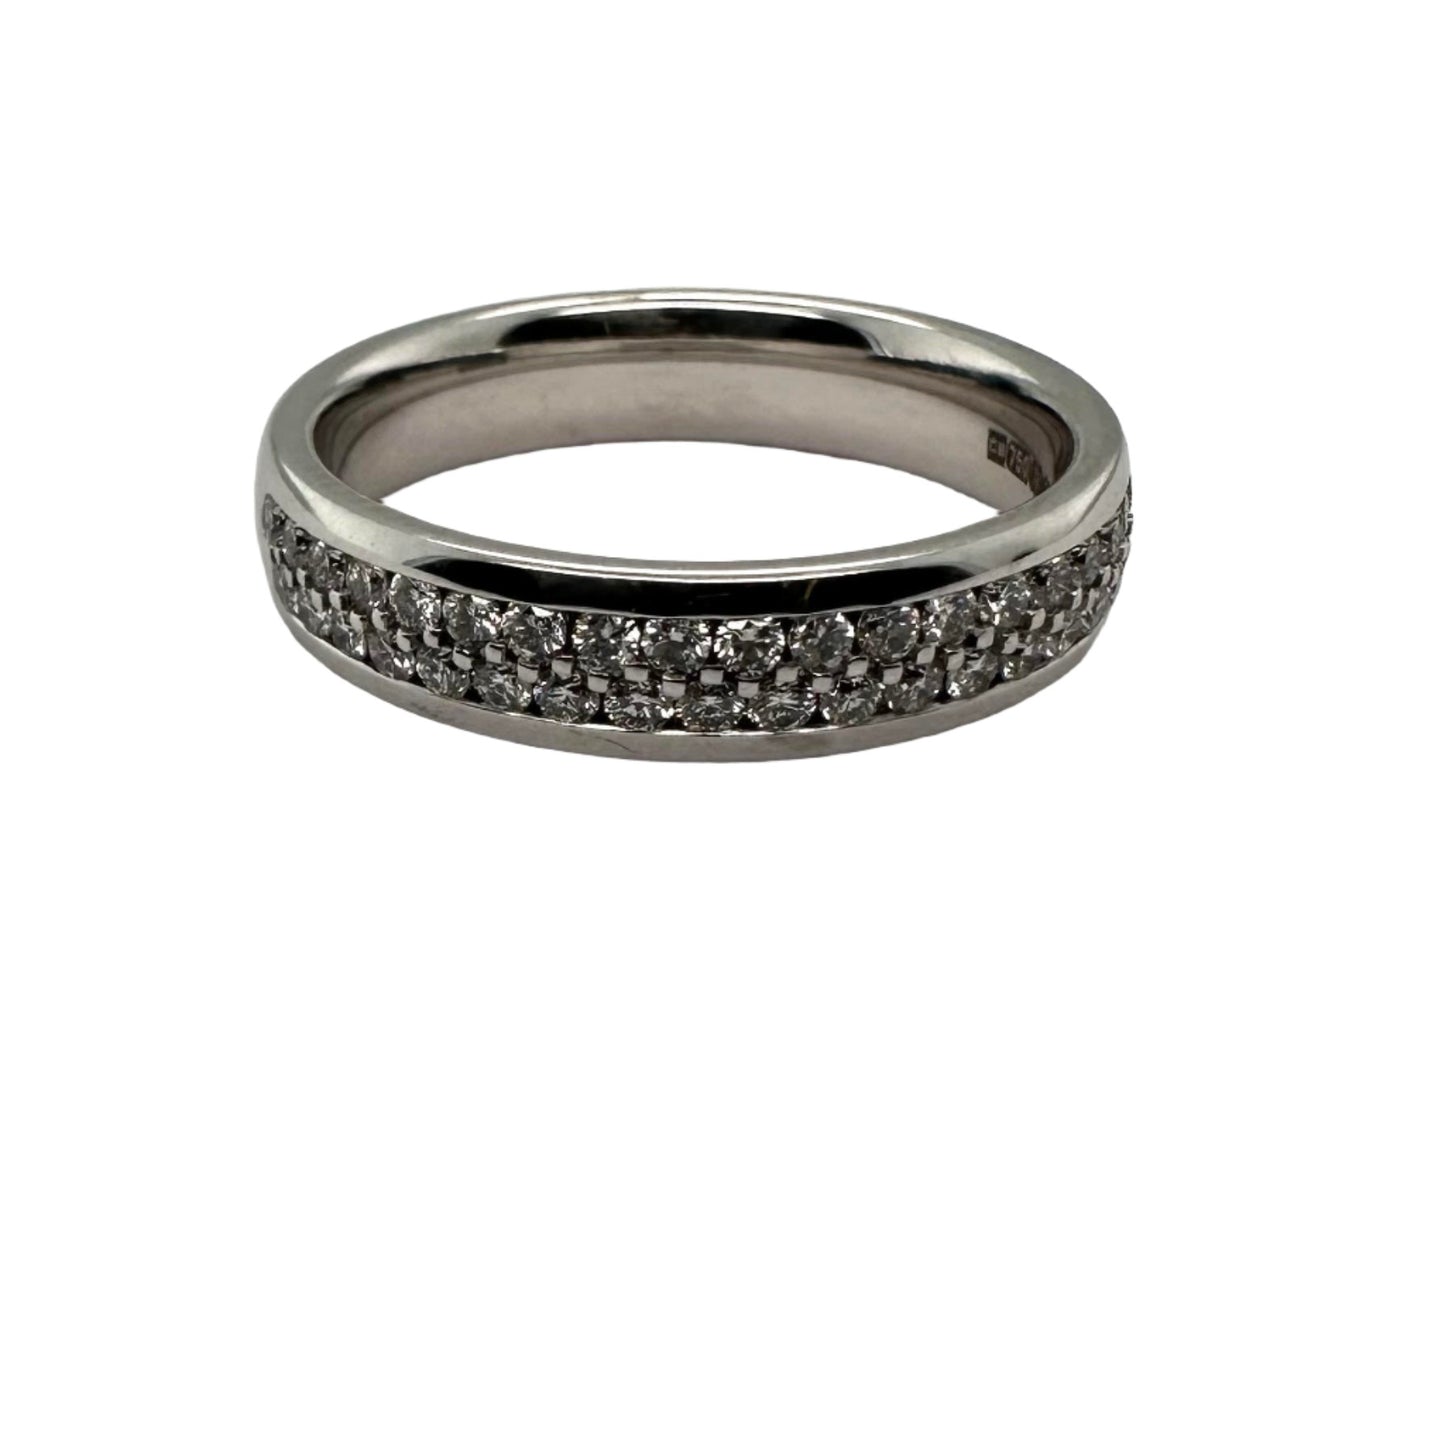 4.5mm white gold wedding band with pave diamonds